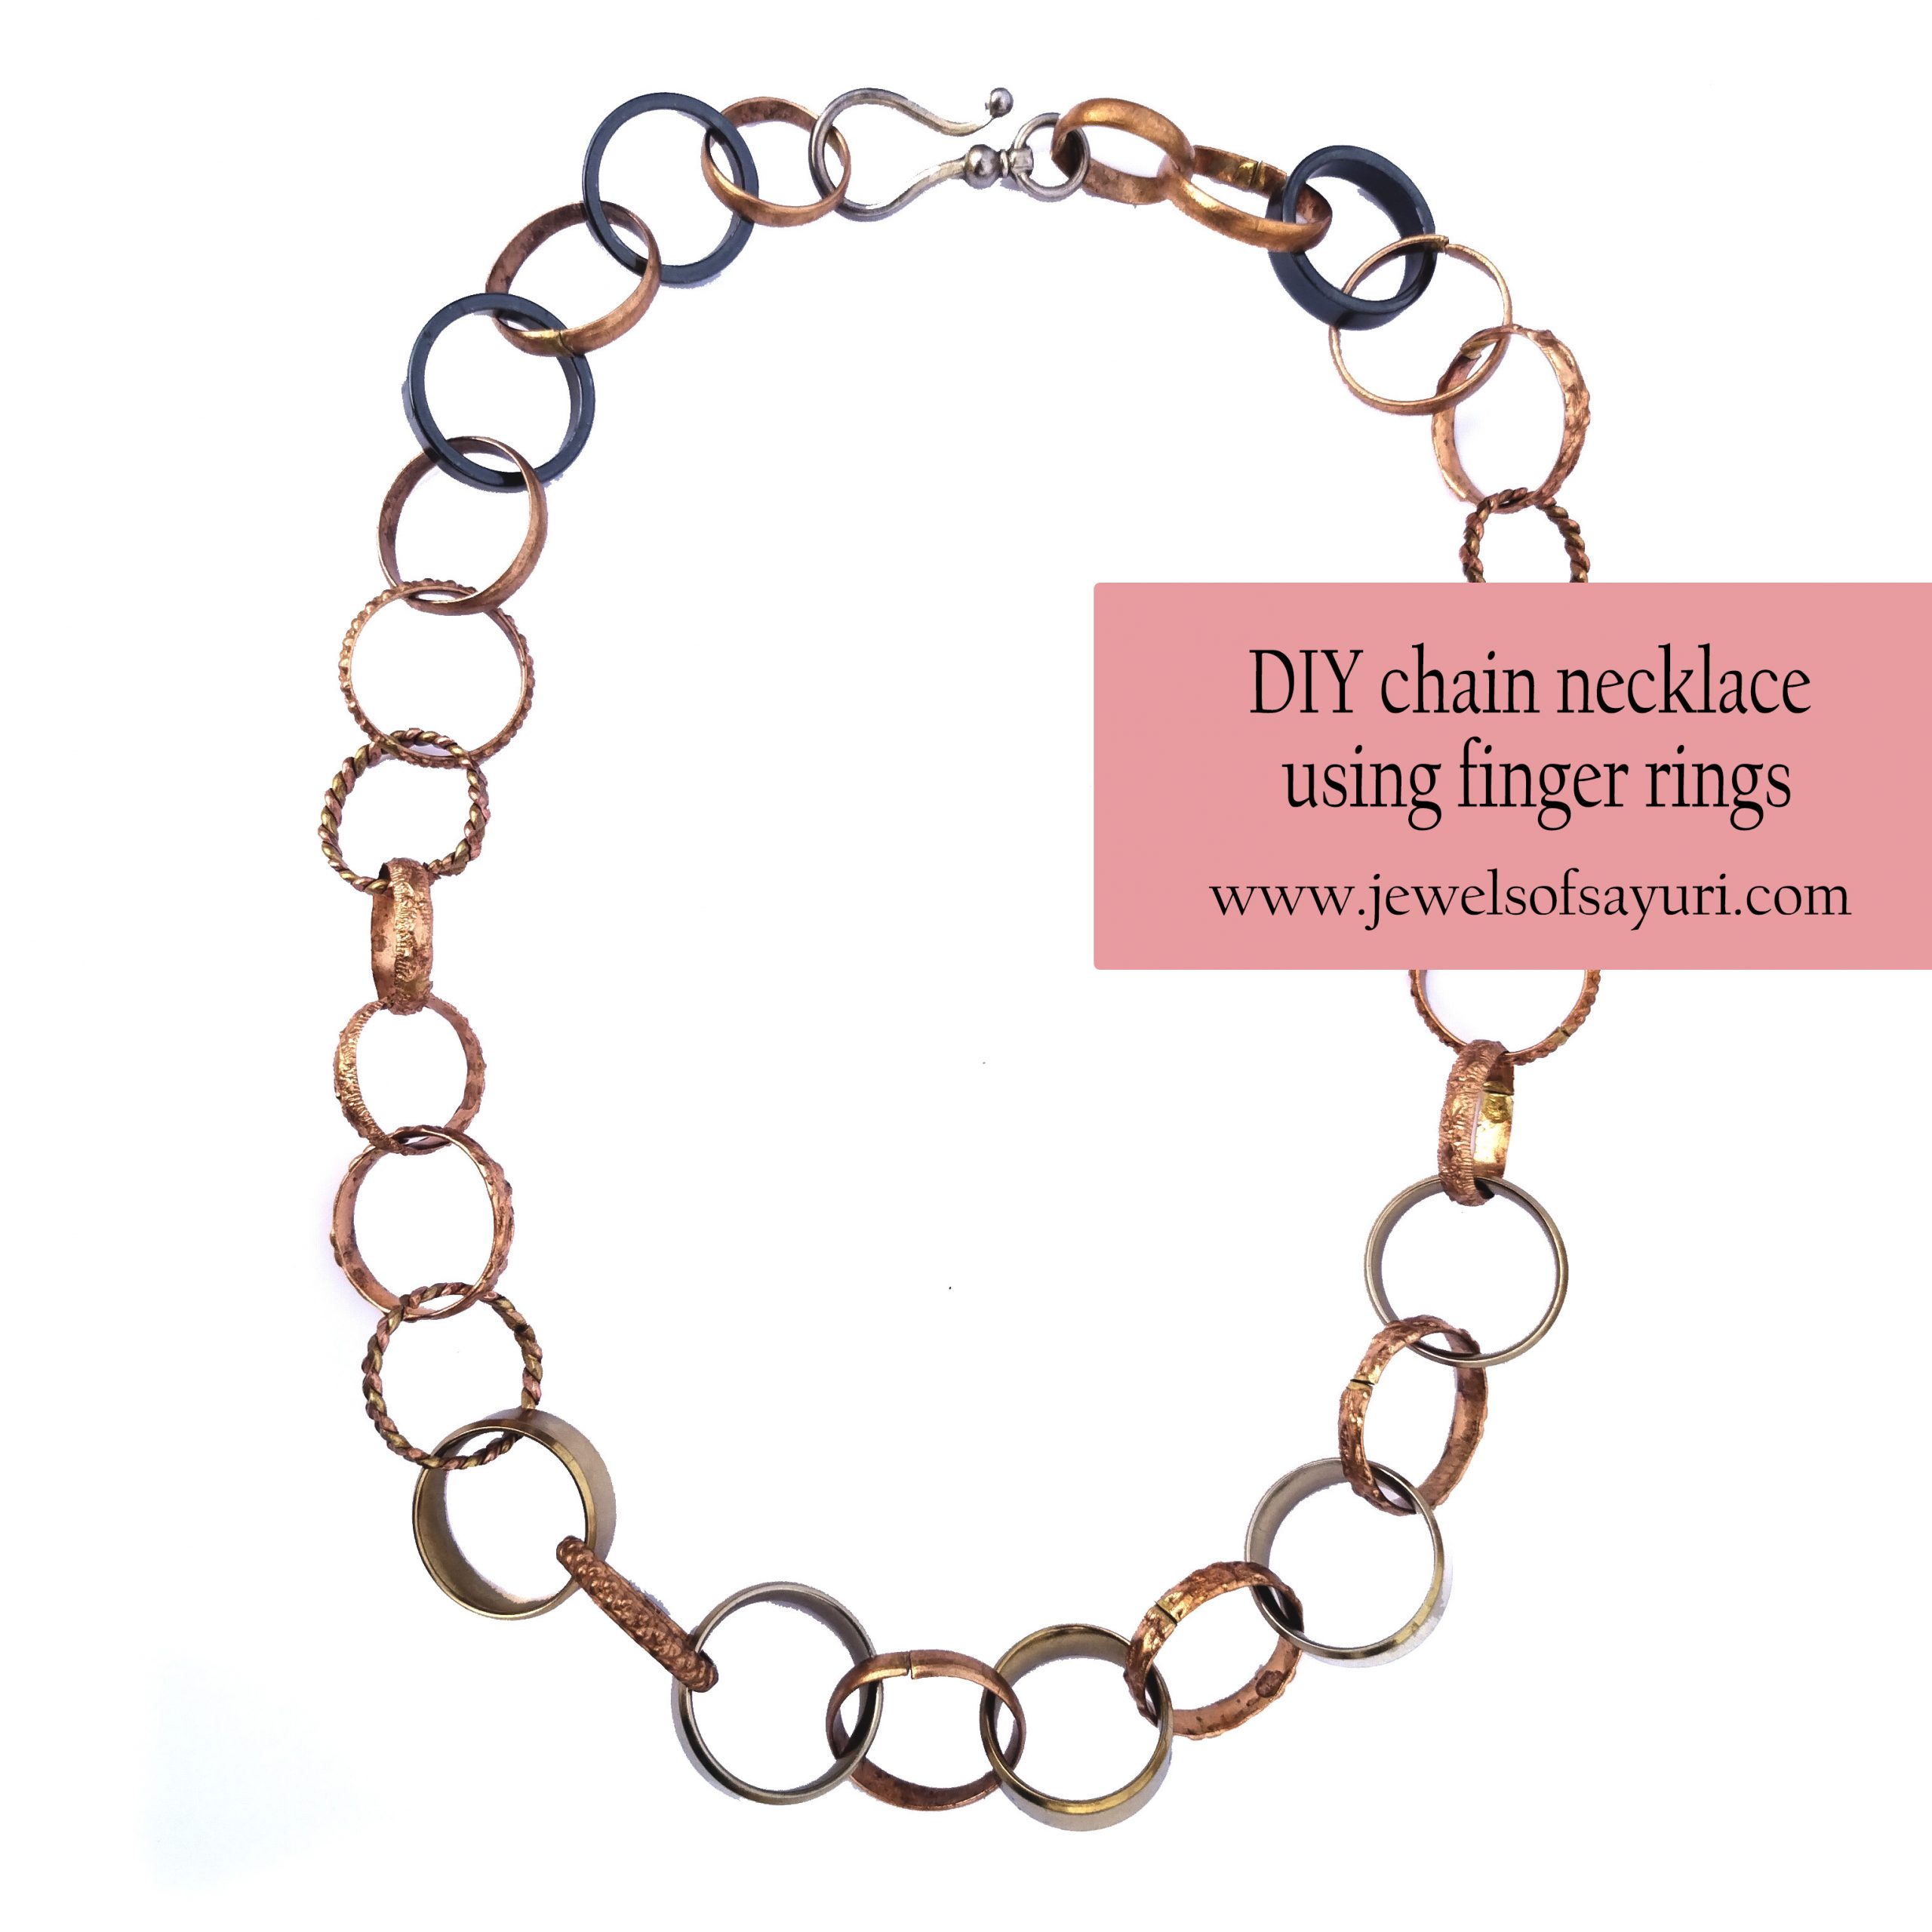 DIY chain with finger rings tutorial